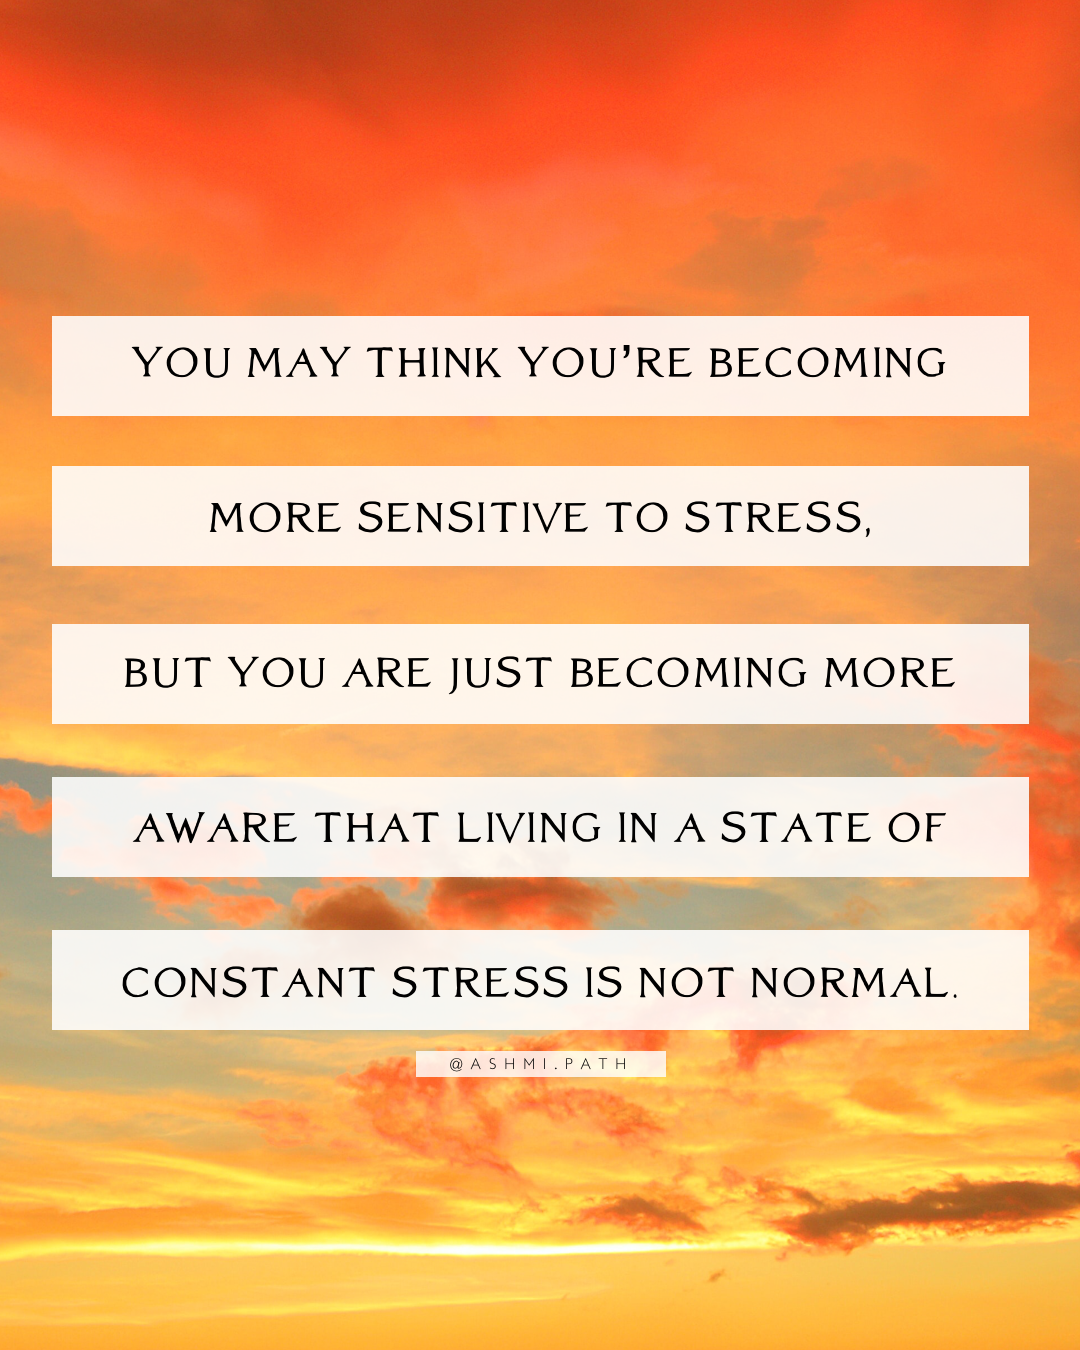 Feeling More Stressed, Or Just More Attuned to Stress?